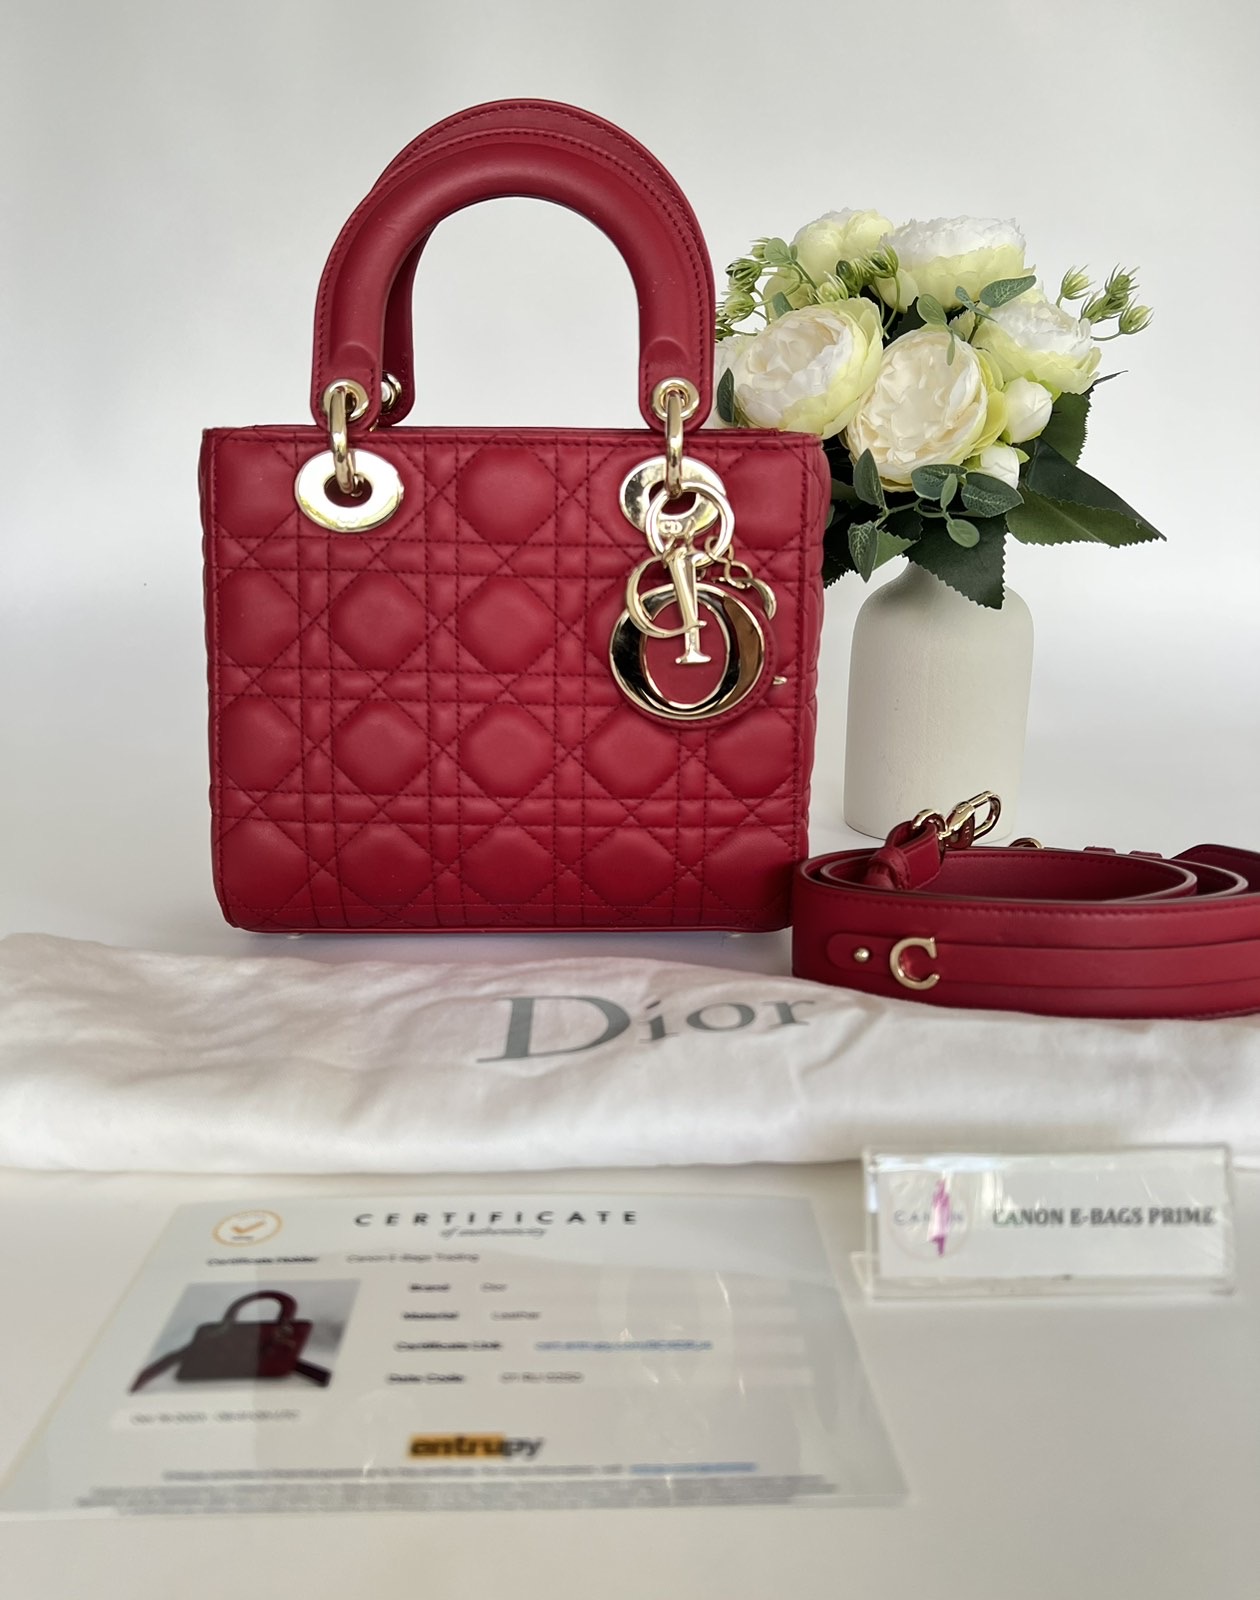 Michael Kors Emmy Dome Saffiano Red Satchel Two way Bag. - Canon E-Bags  Prime